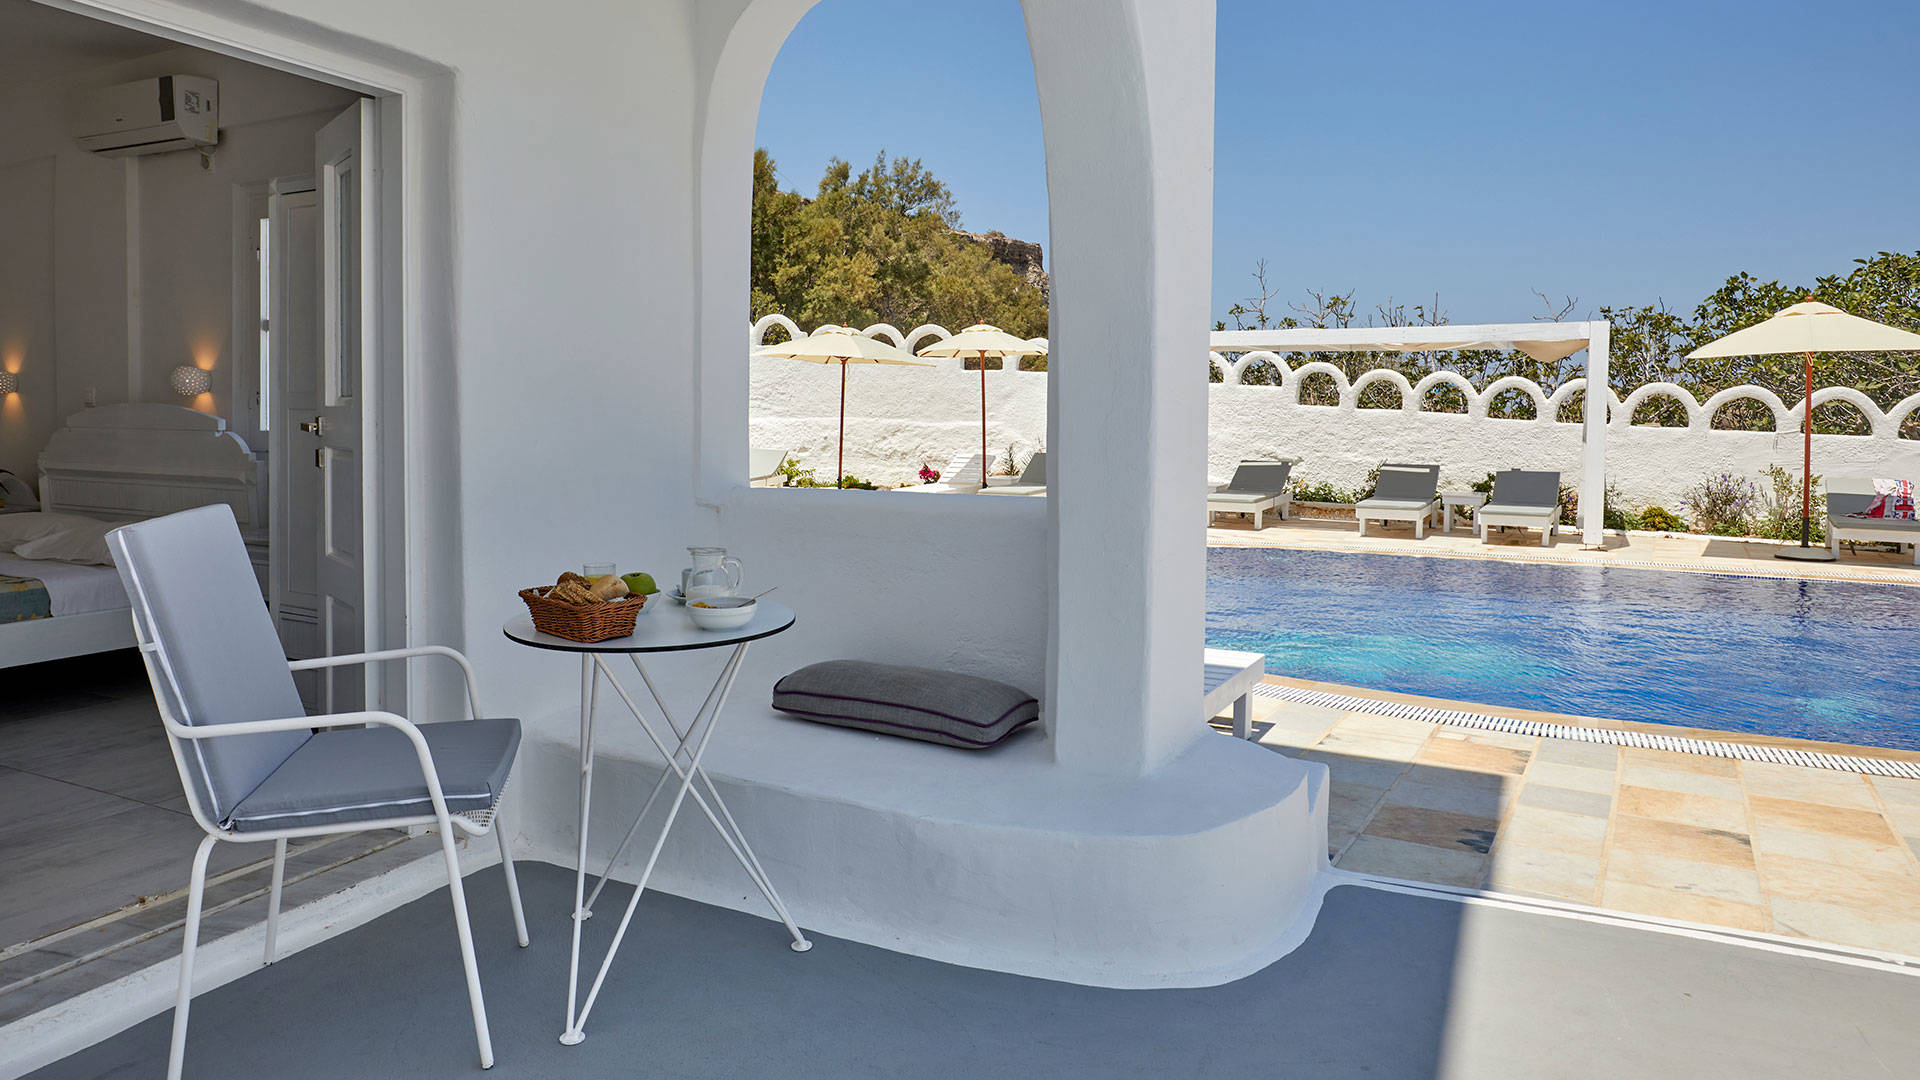 
Santorini View Hotel with Terrace Patio and sharing swimming pool